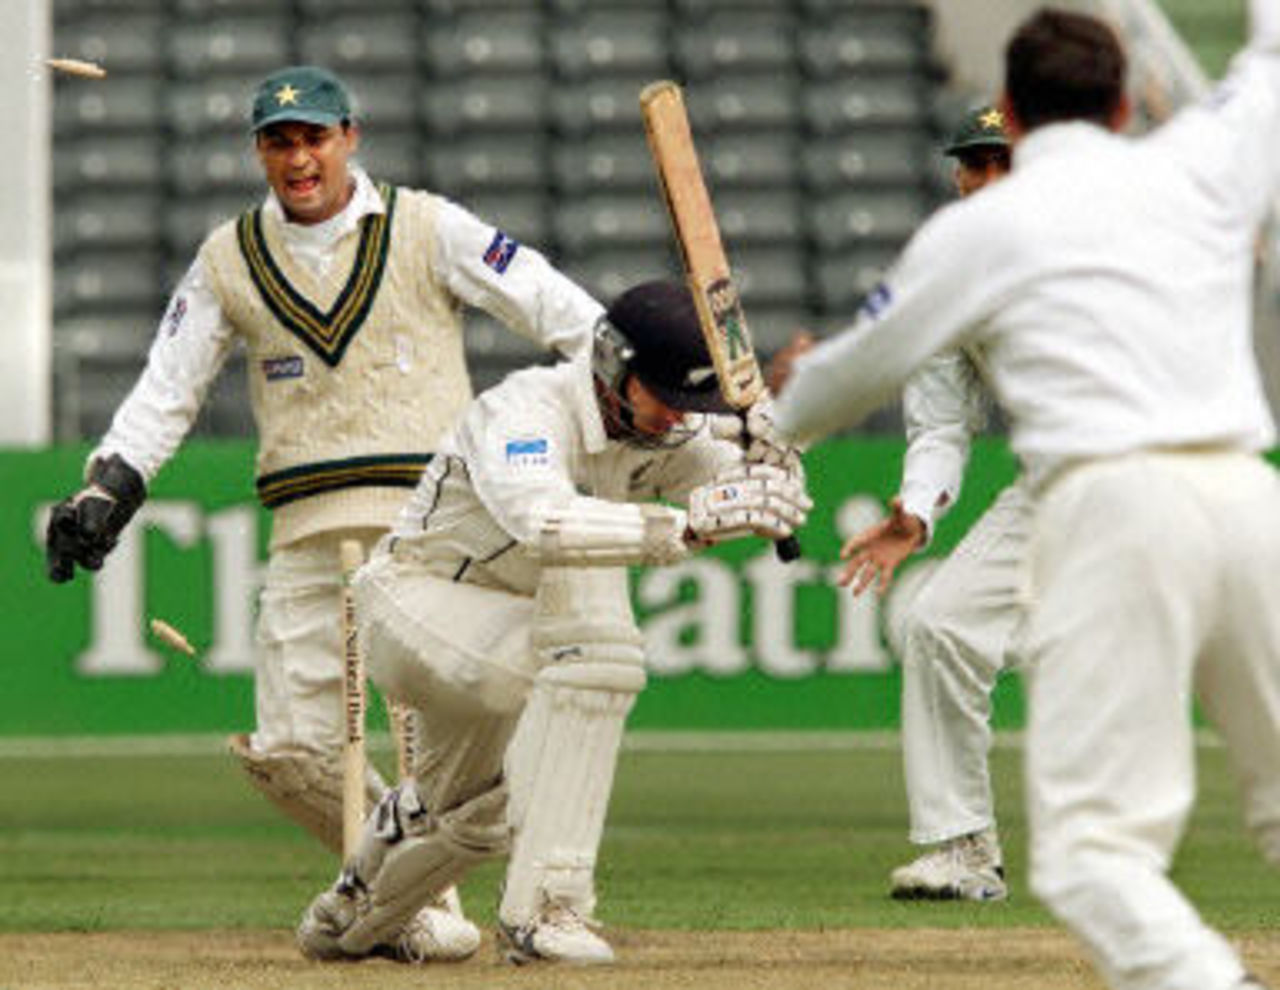 Mark Richardson is clean bowled by Saqlain Mushtaq as Moin Khan and Younis Khan look on, day 1, 2nd Test at Christchurch, 15-19 March 2001.